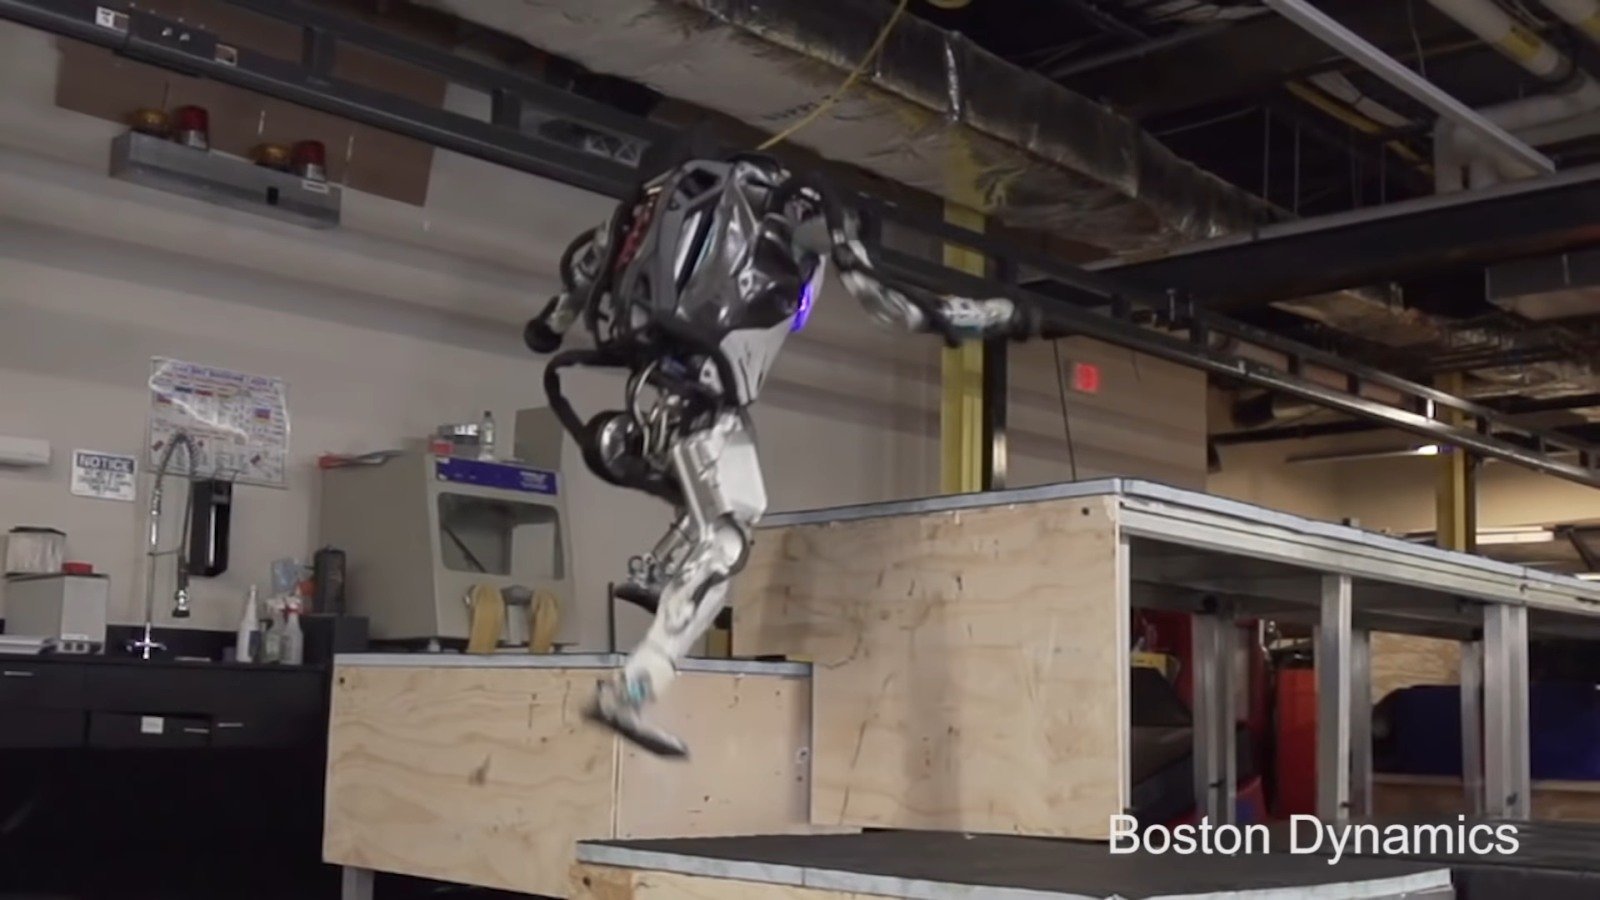 #video | the Company Boston Dynamics have trained your robot 